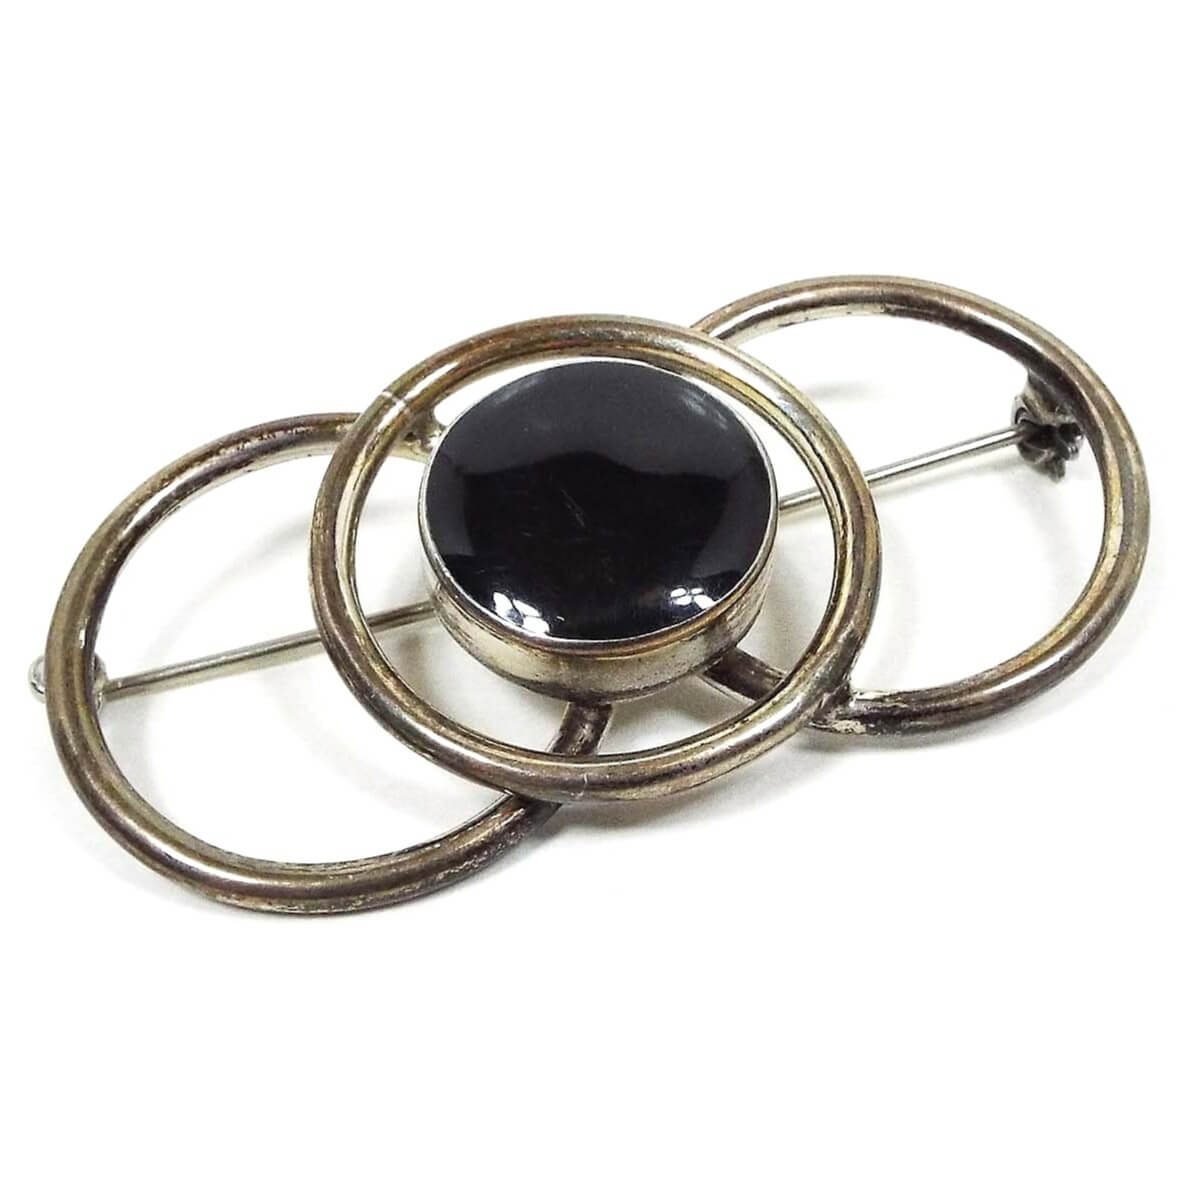 Front view of the retro vintage Taxco brooch pin. The sterling silver is darkened from age to a dark gray and even black in some areas. There are three open circles that overlap making up the brooch. The middle circle has a round area in the middle of it with black enamel. 